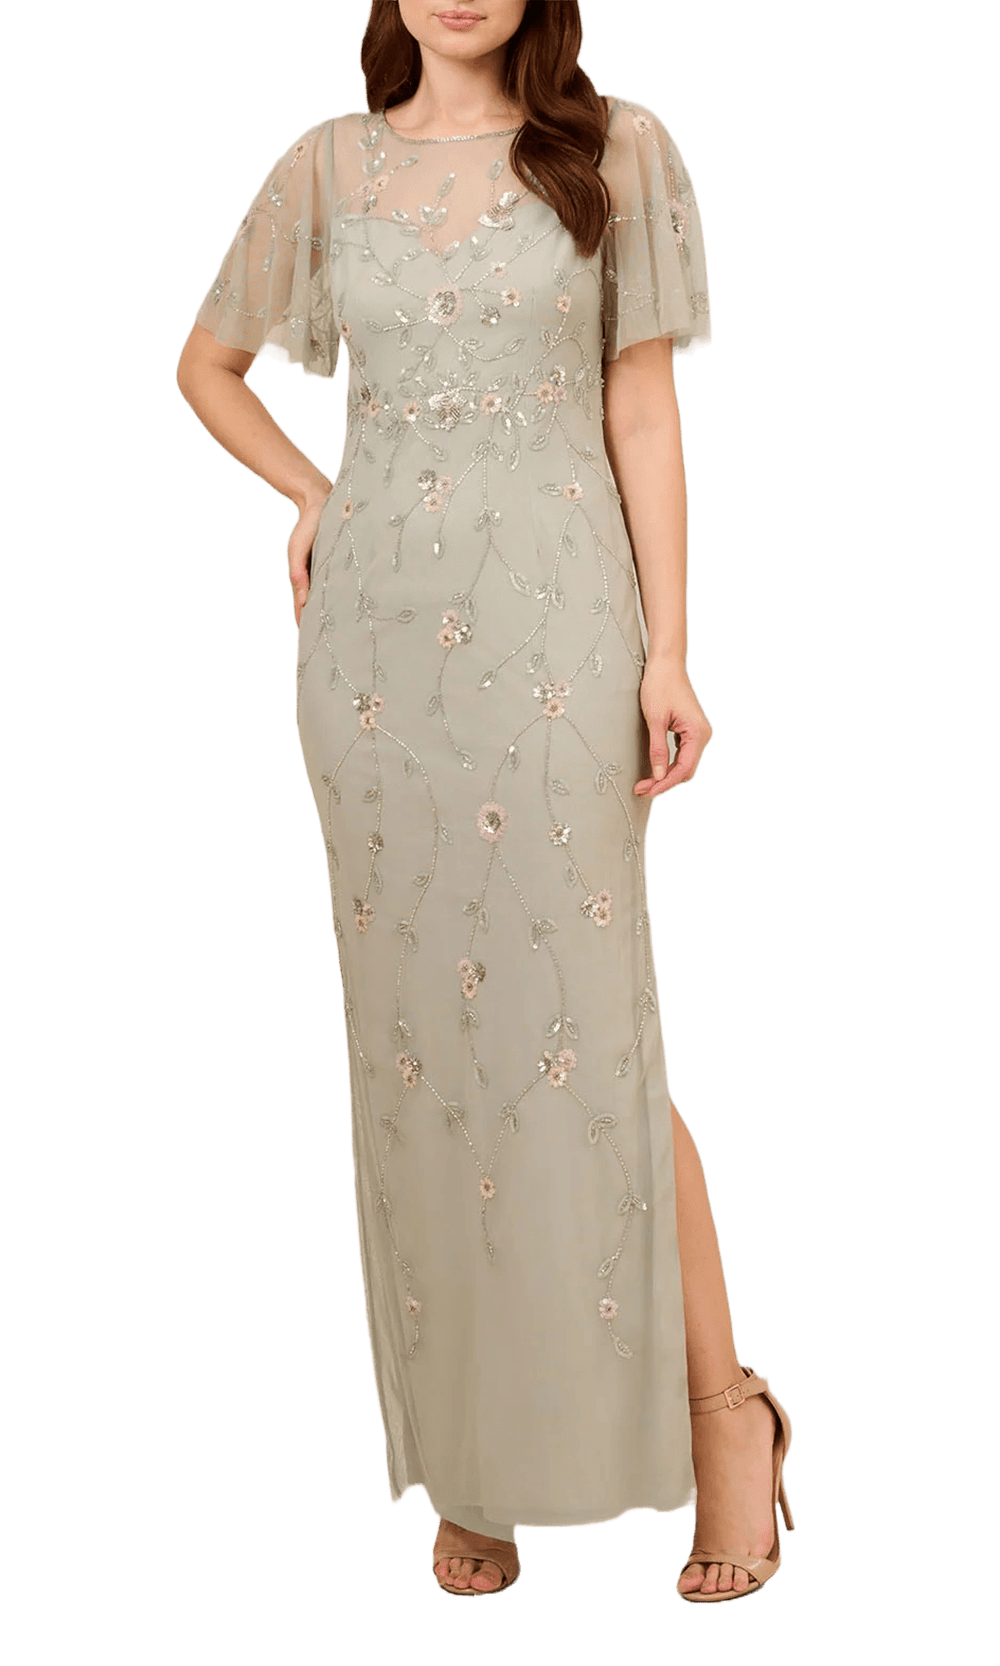 Adrianna Papell AP1E210246 - Beaded Illusion Neckline Gown Mother of the Bride Dresses 2 / Frosted Sage